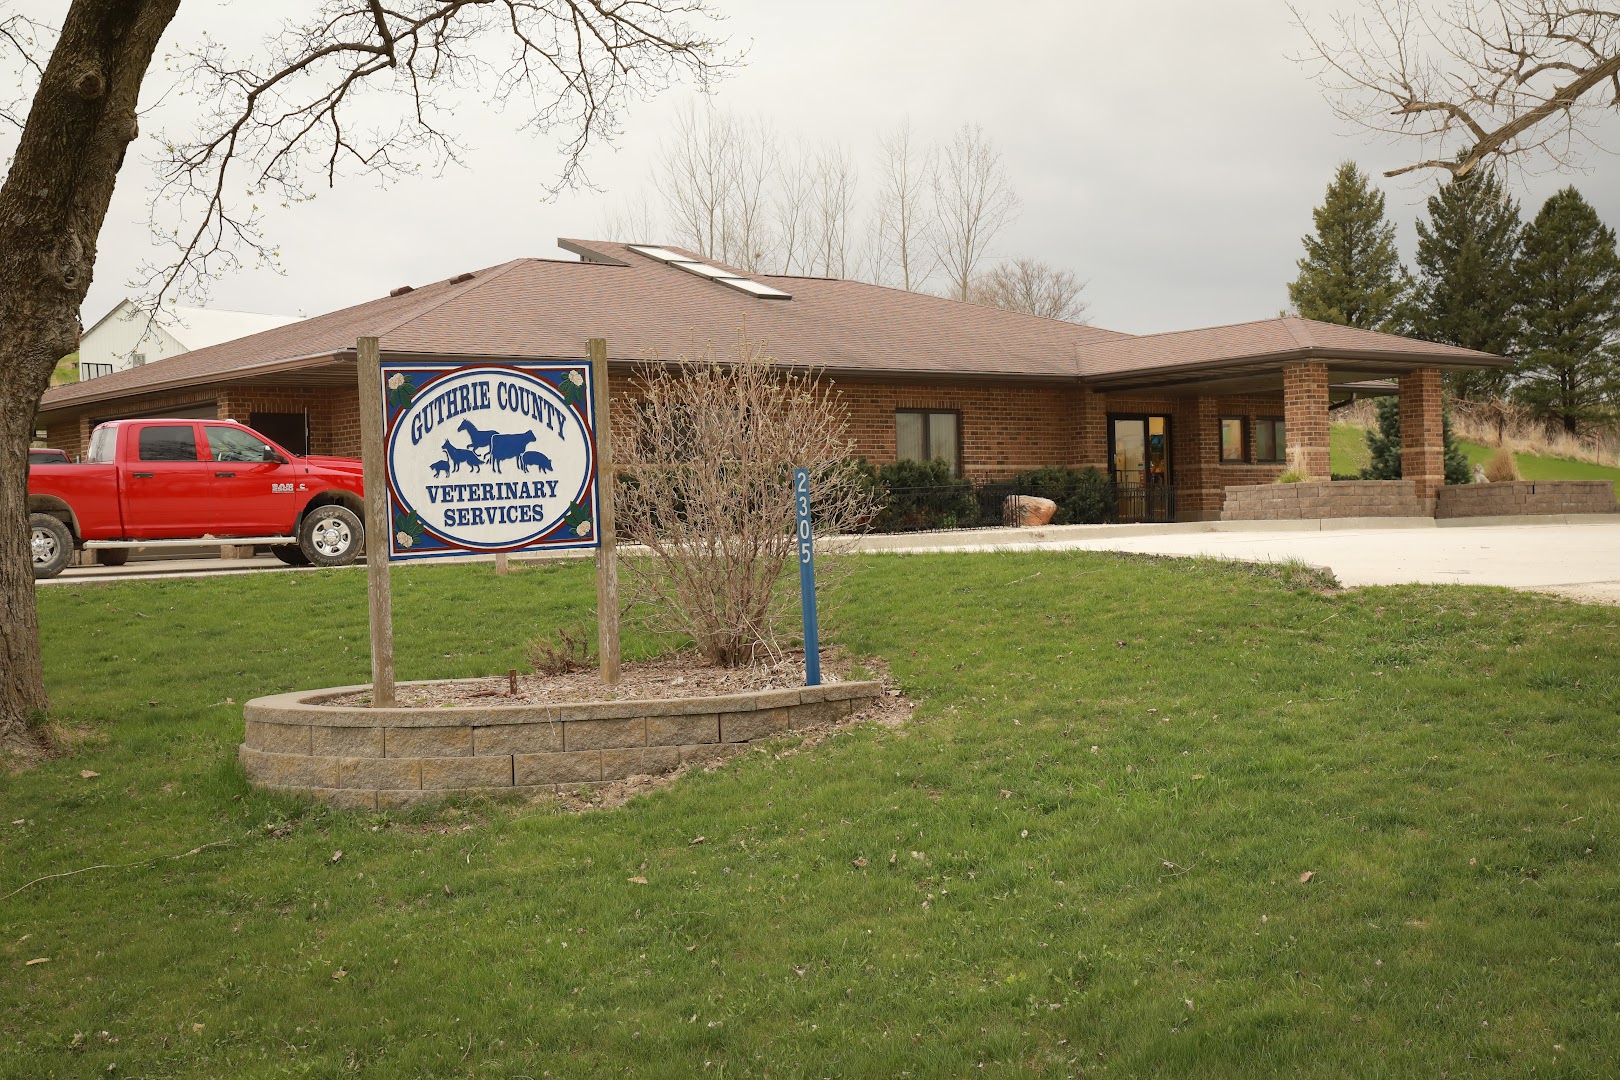 Guthrie County Veterinary Services